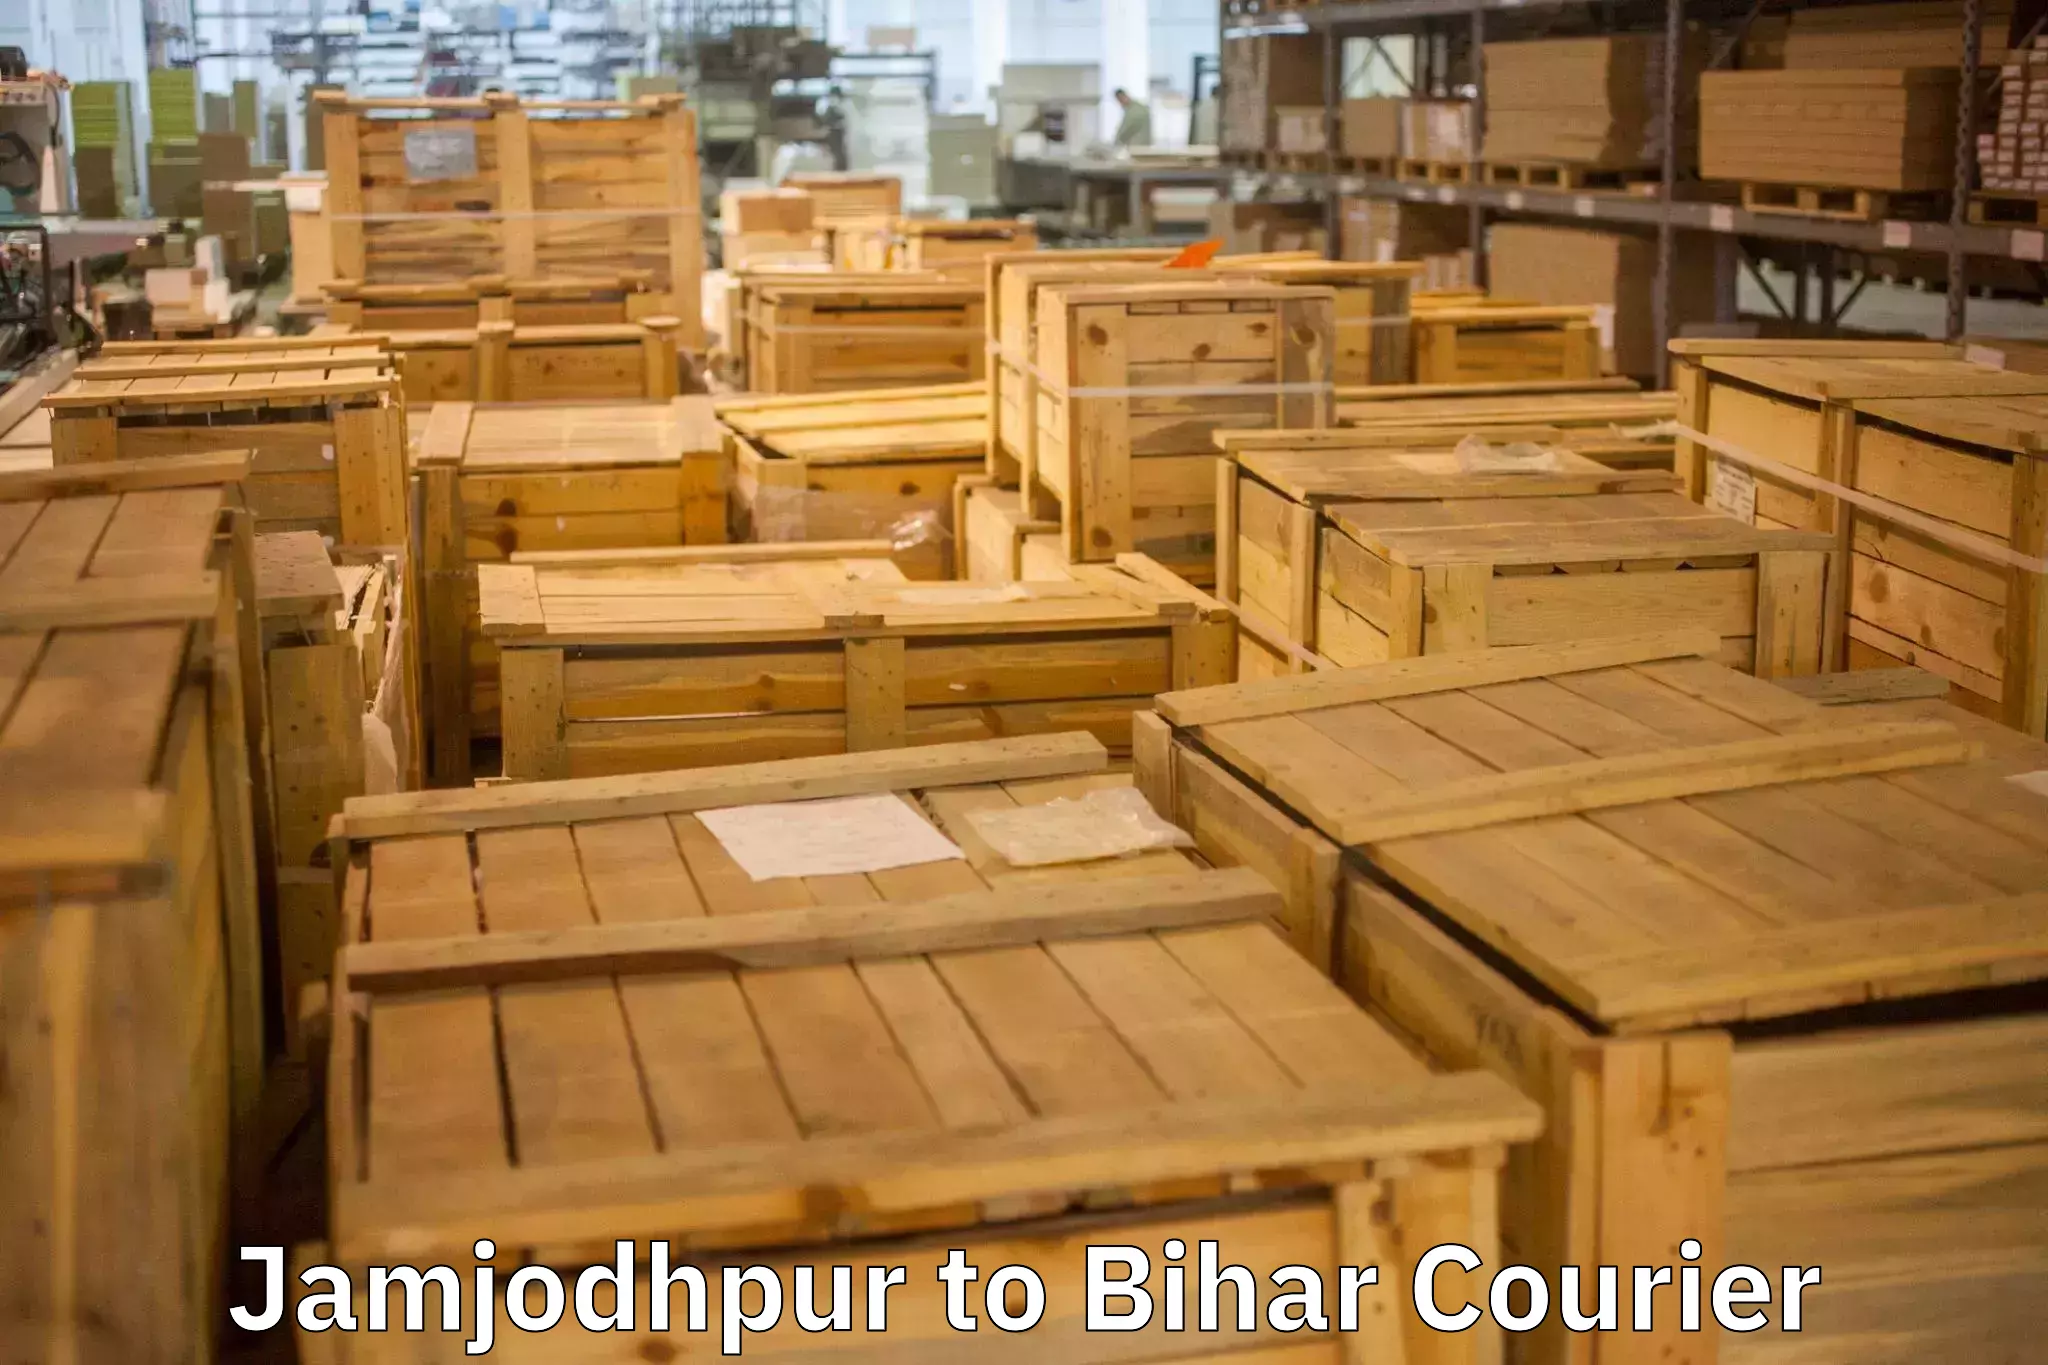 Trusted furniture movers in Jamjodhpur to Bhorey